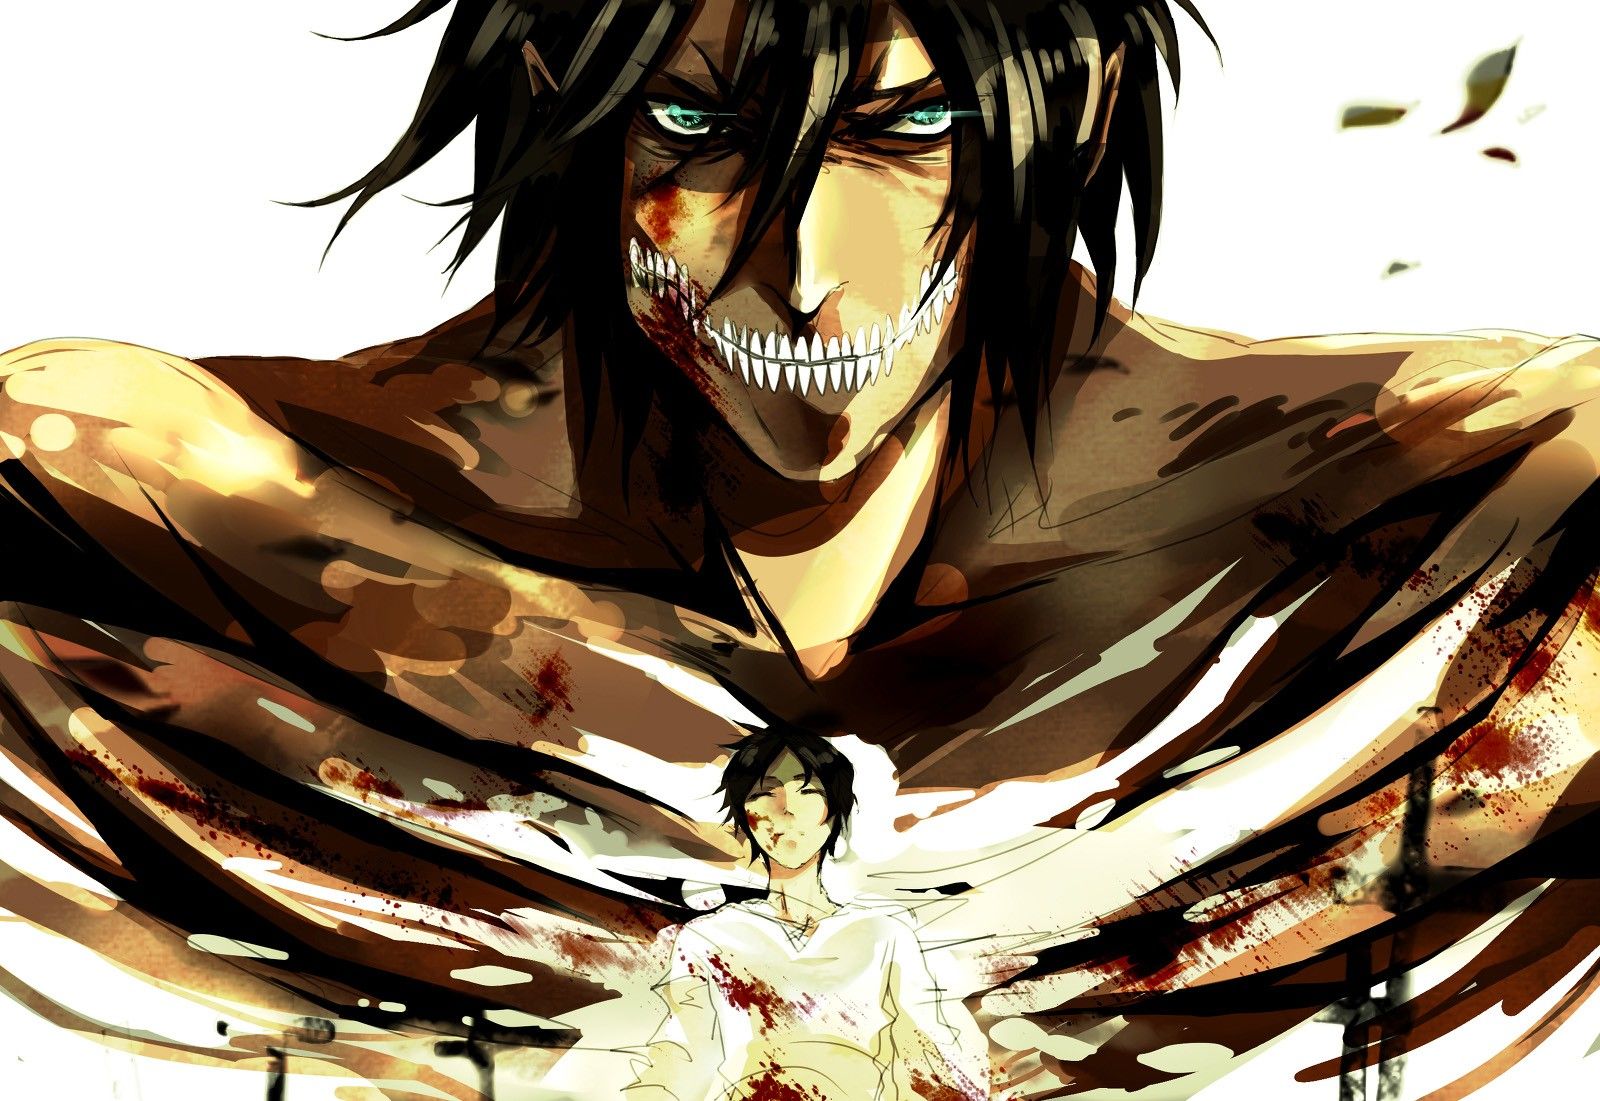 Does anybody have good wallpaper for Attack on Titans for mobile